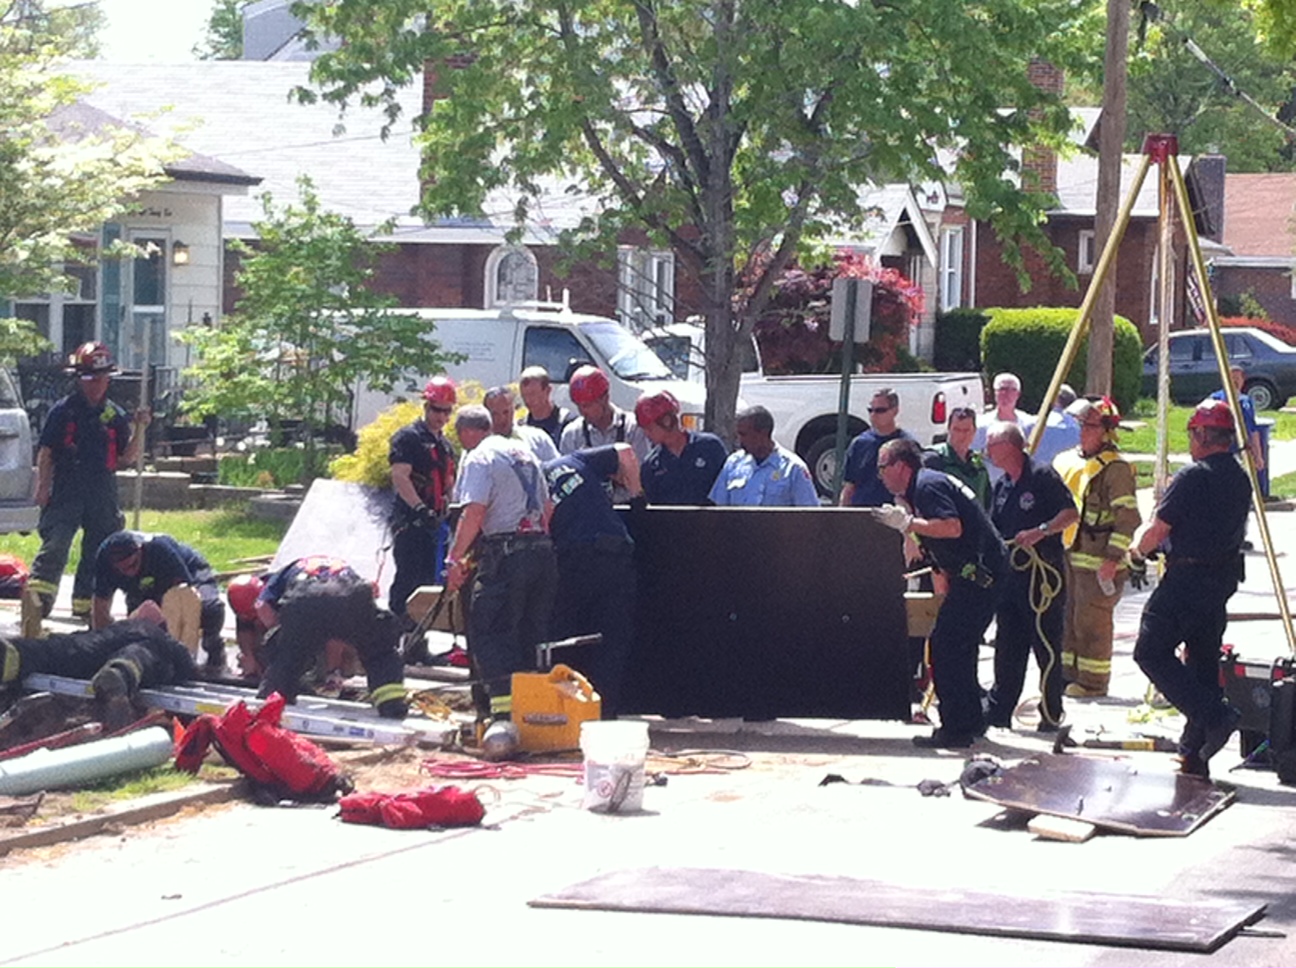 Brentwood Public Works employee trapped in hole, rescued